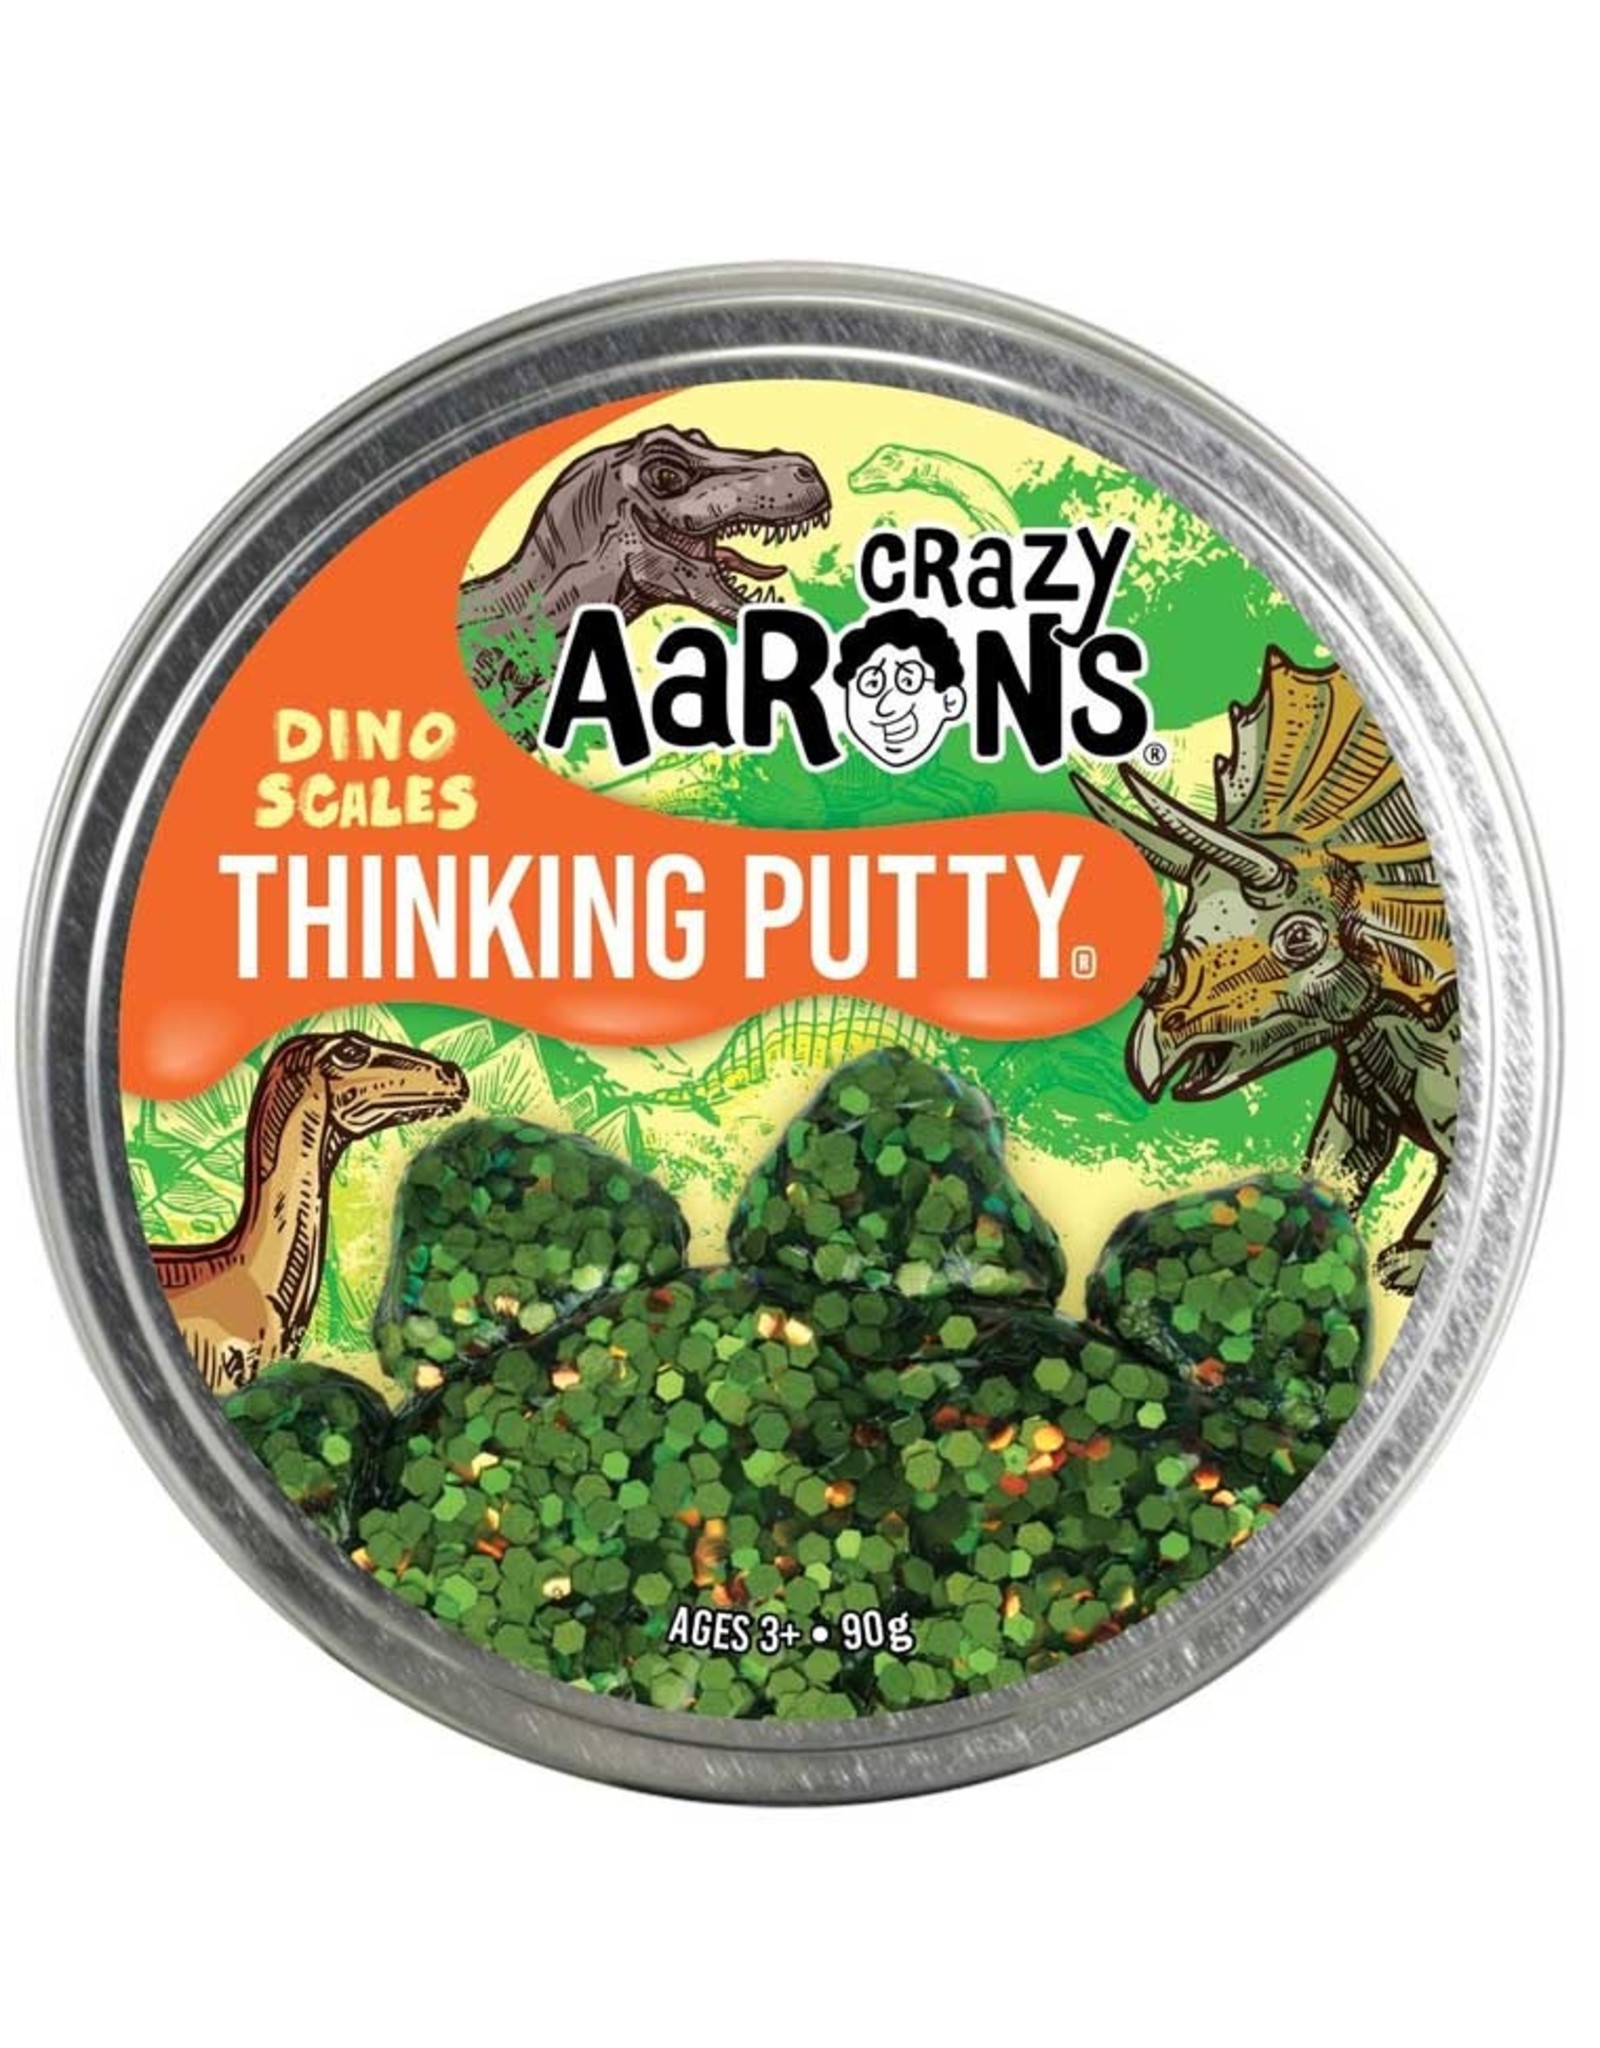 Crazy Aaron's Dino Scale Thinking Putty